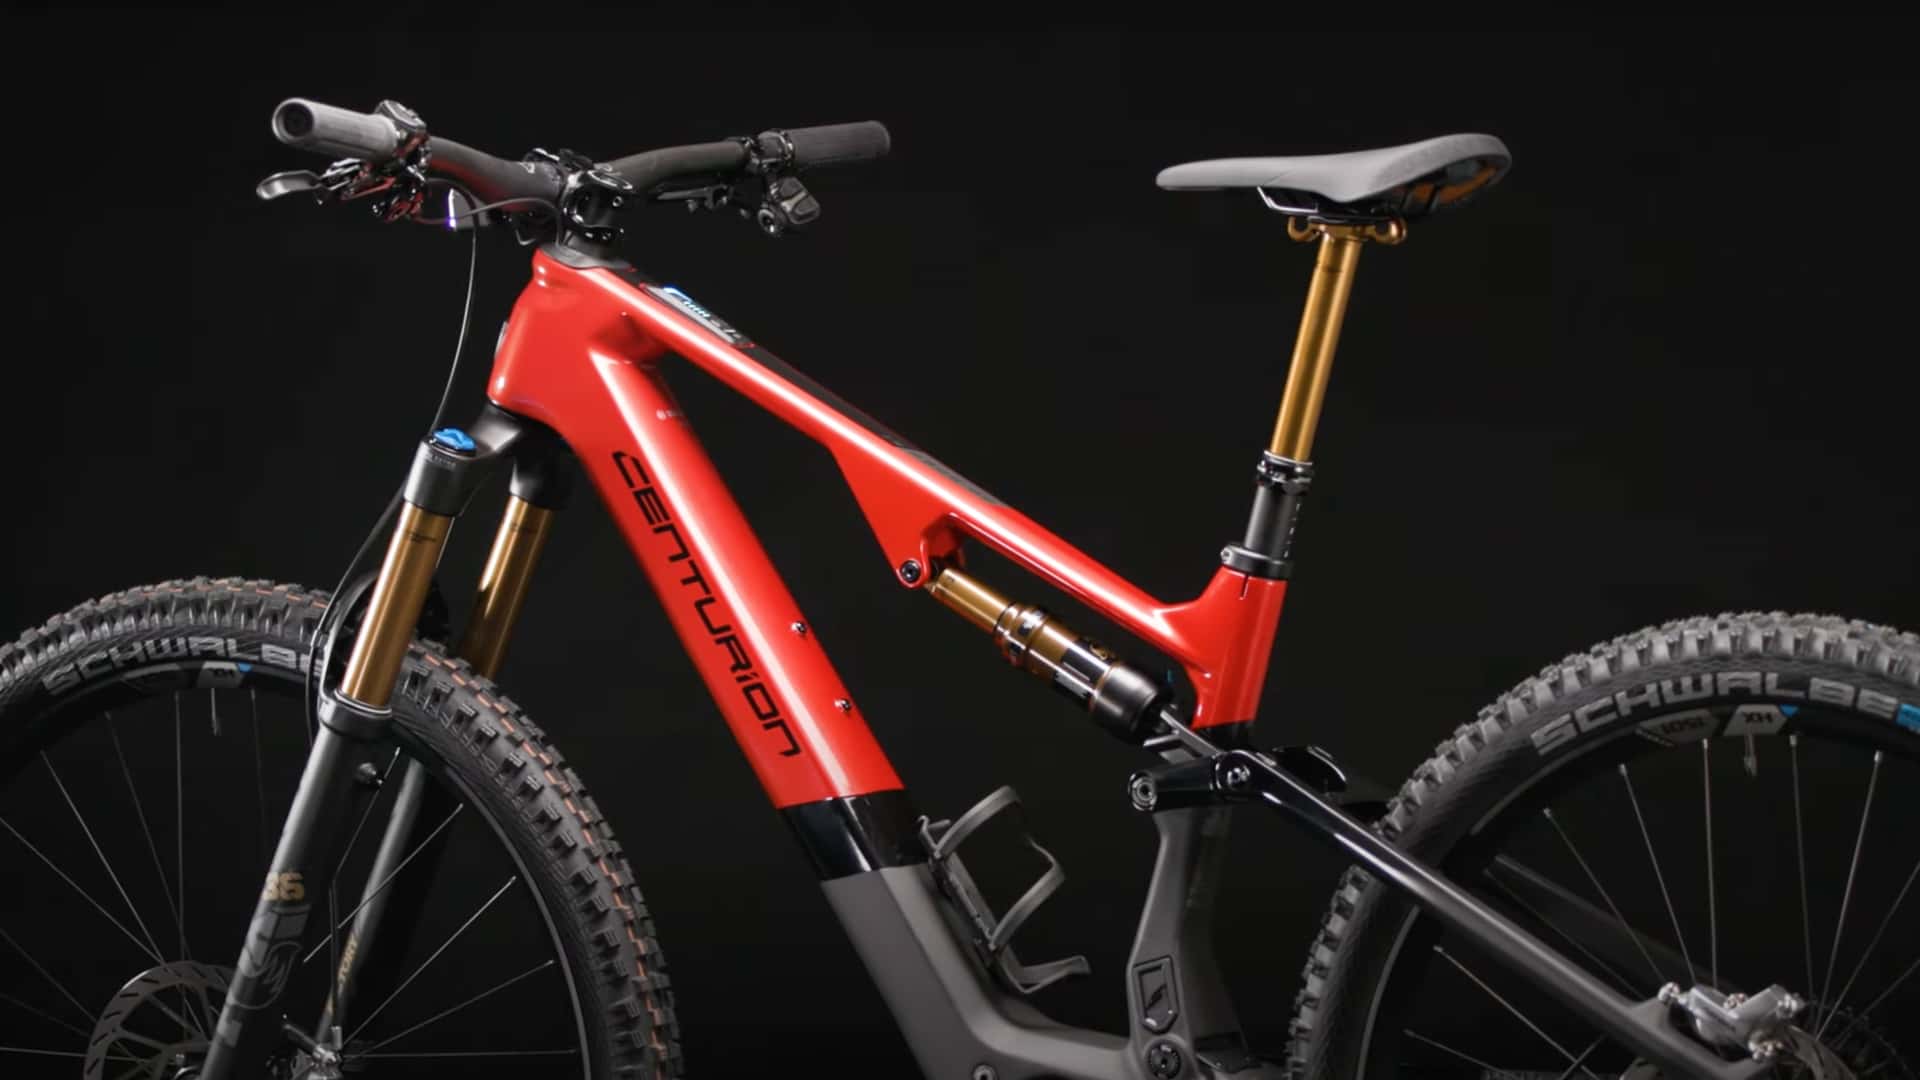 centurion’s newest e-mtb is a lightweight trail ripper loaded with tech